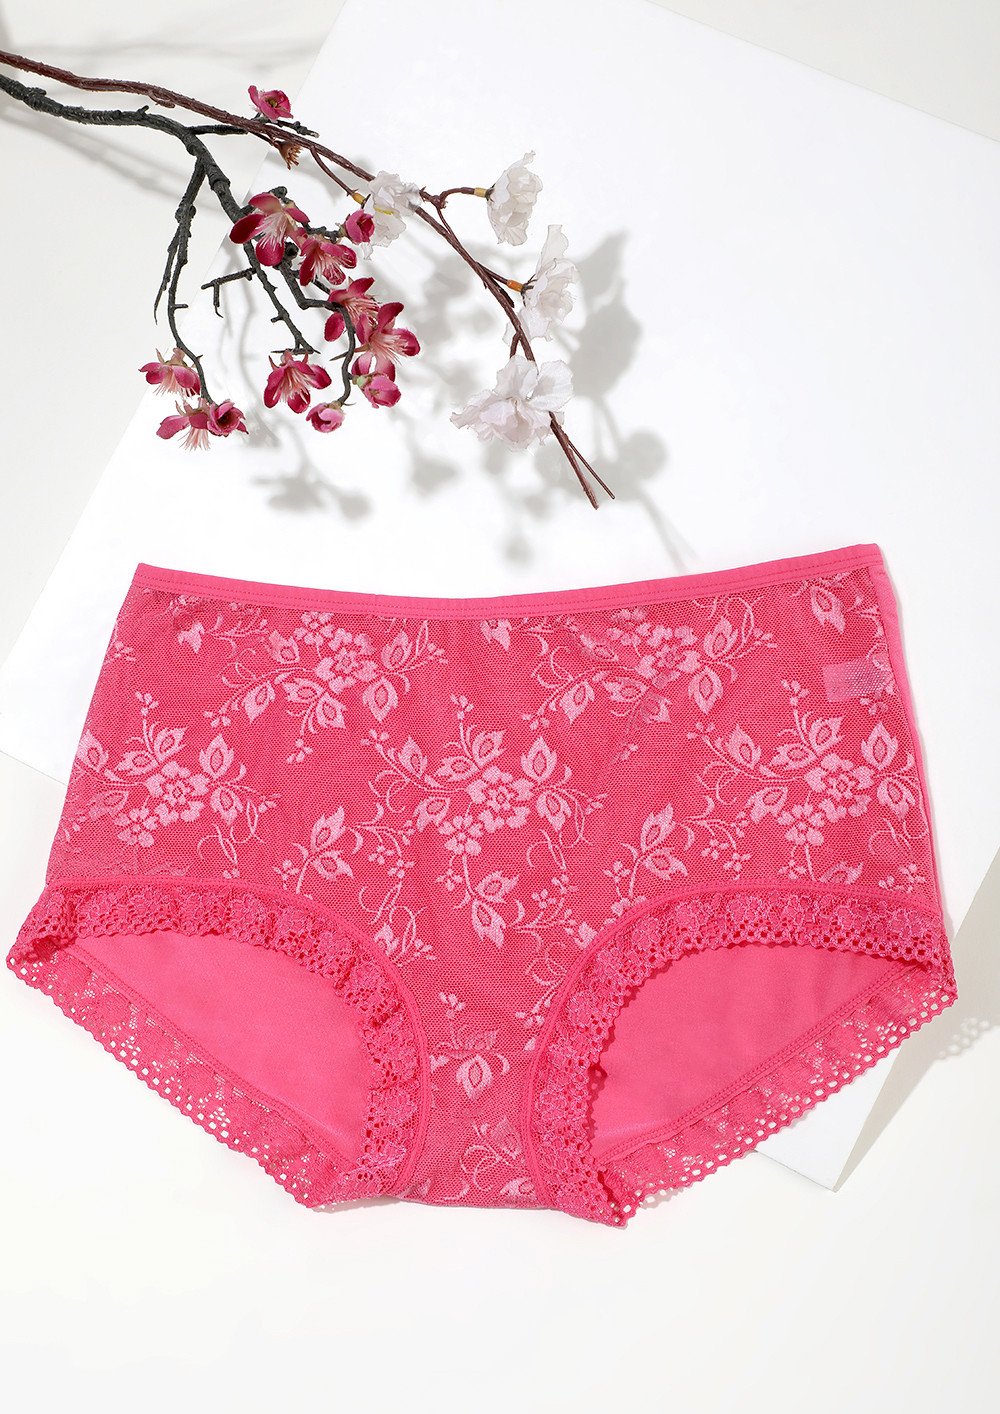 PINK HIGH-WAIST HIPSTERS WITH LACE TRIMMING